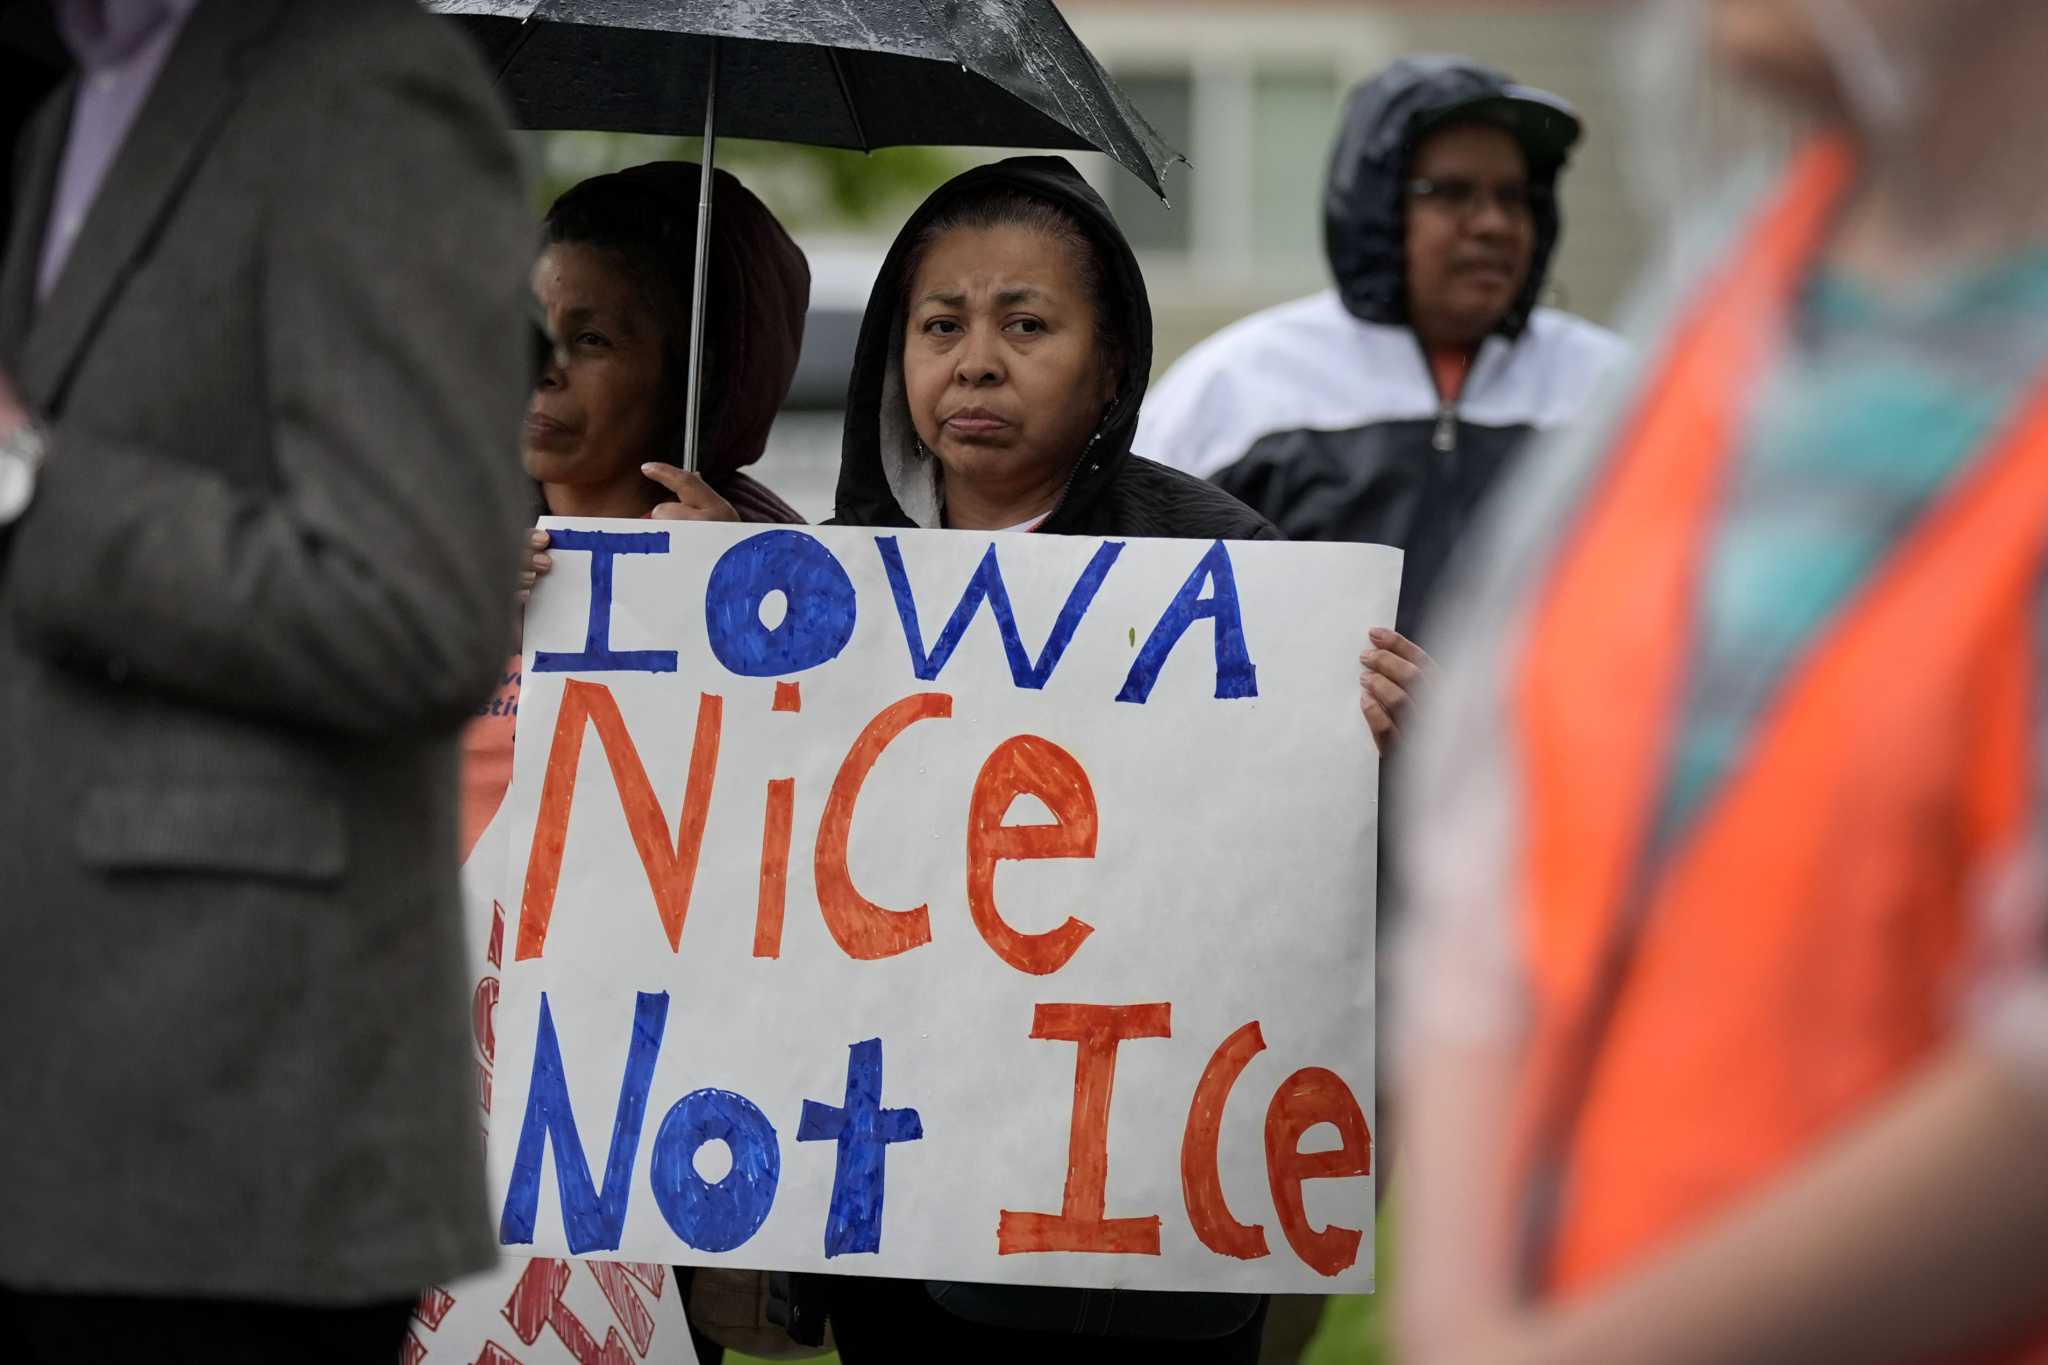 Iowa law allows police to arrest and deport migrants. Civil rights groups are suing